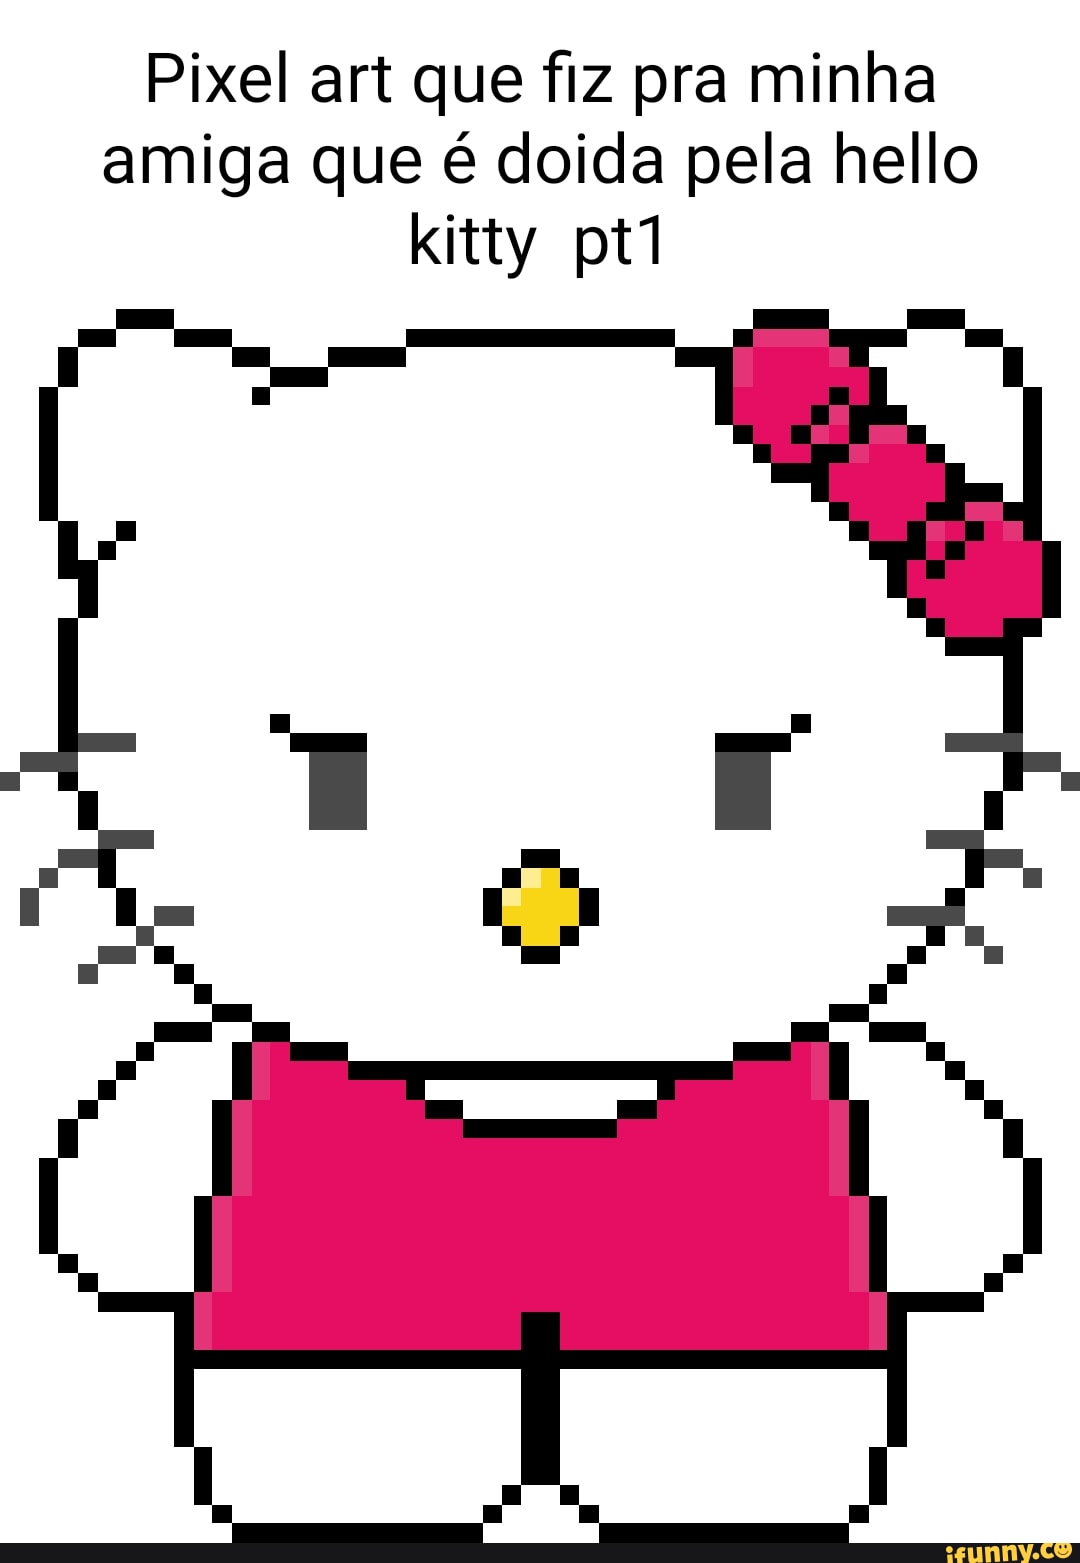 BRO a brazilian store accidentally tried to sell one of those traumacore  hello kitty edits as a coloring page HELP - iFunny